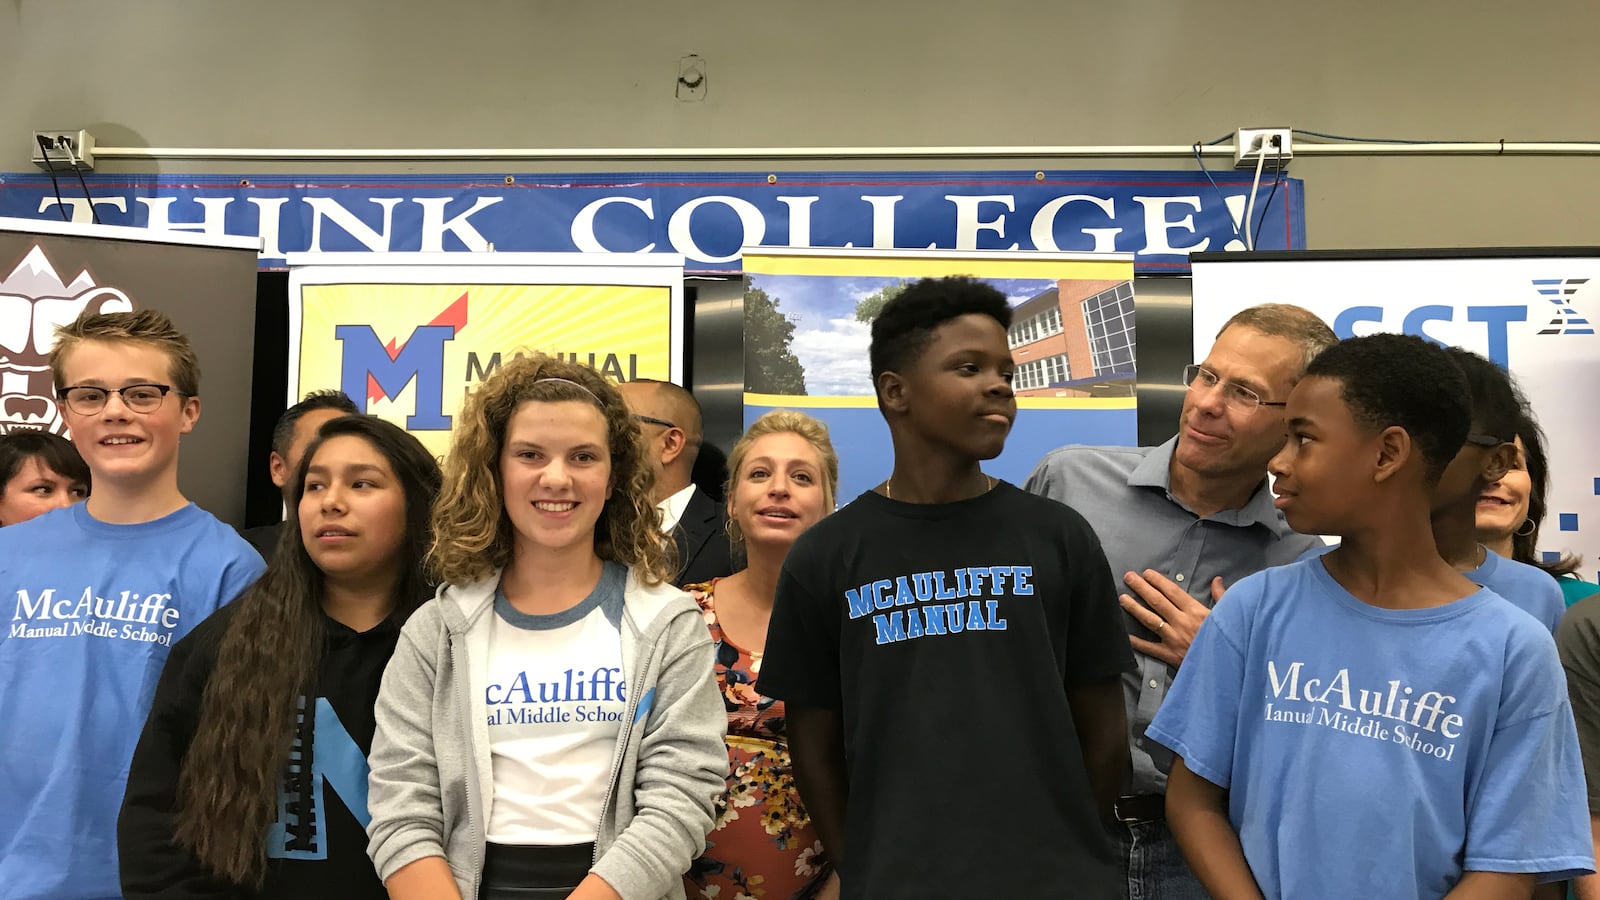 McAuliffe Manual students gather for a photo with Denver Public Schools officials at a press conference in 2017.